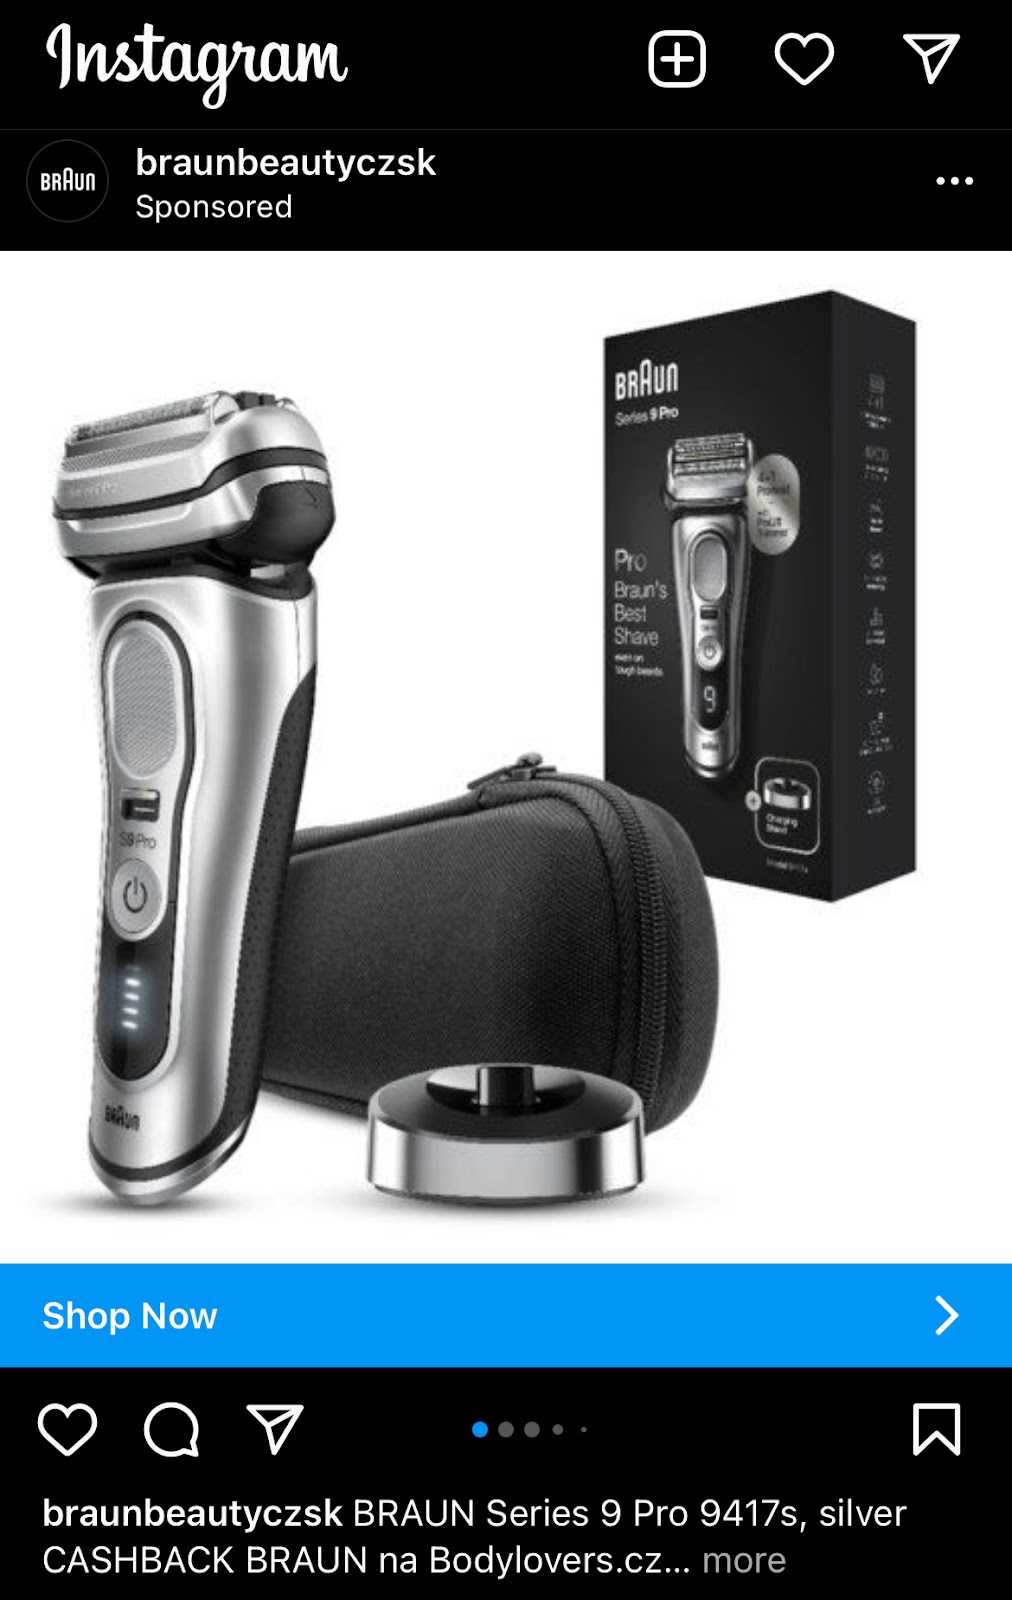 Braun's Insta post of its new shaver